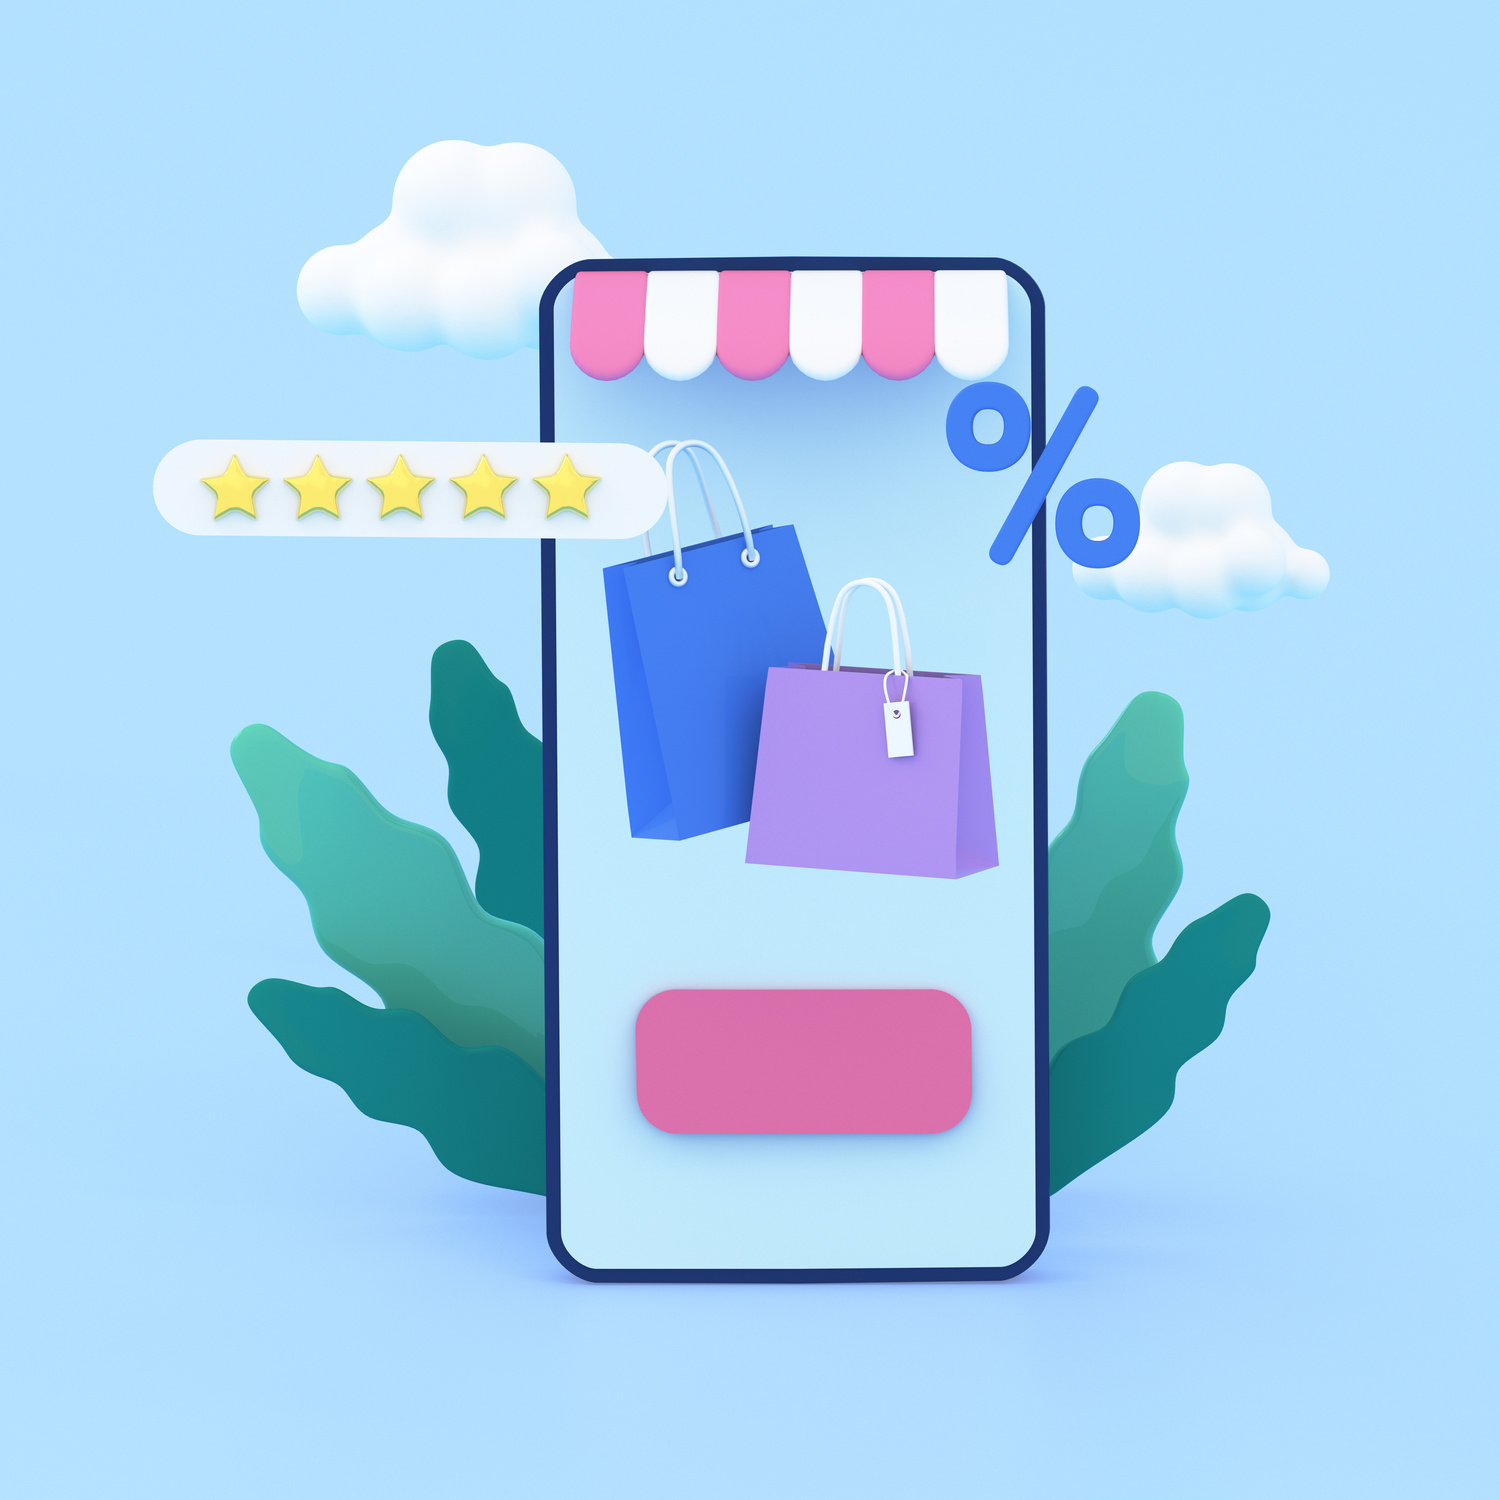 3d online shopping mobile app with shopping bags, interest rate icon. Sales,  e-commerce, discount and digital marketing concept. 3d render illustartion.